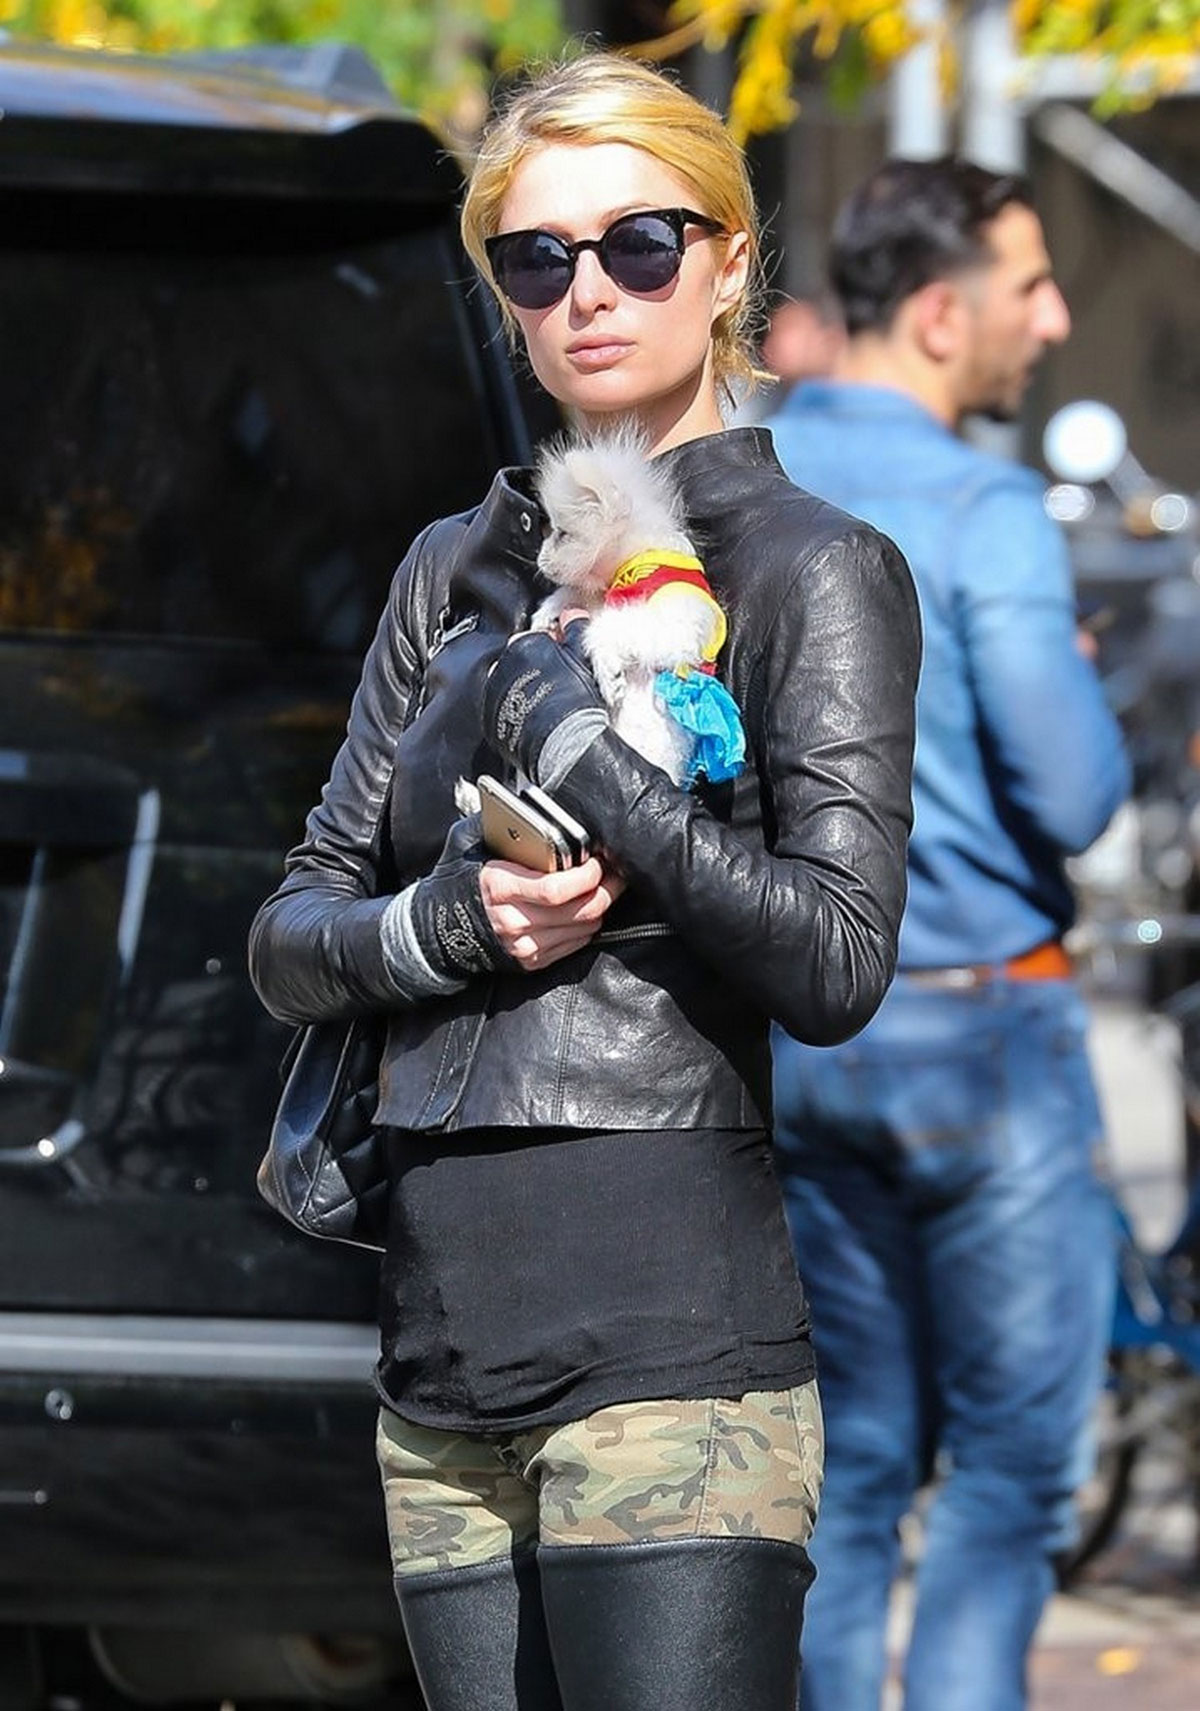 Paris Hilton seen with her dog waiting for a cab